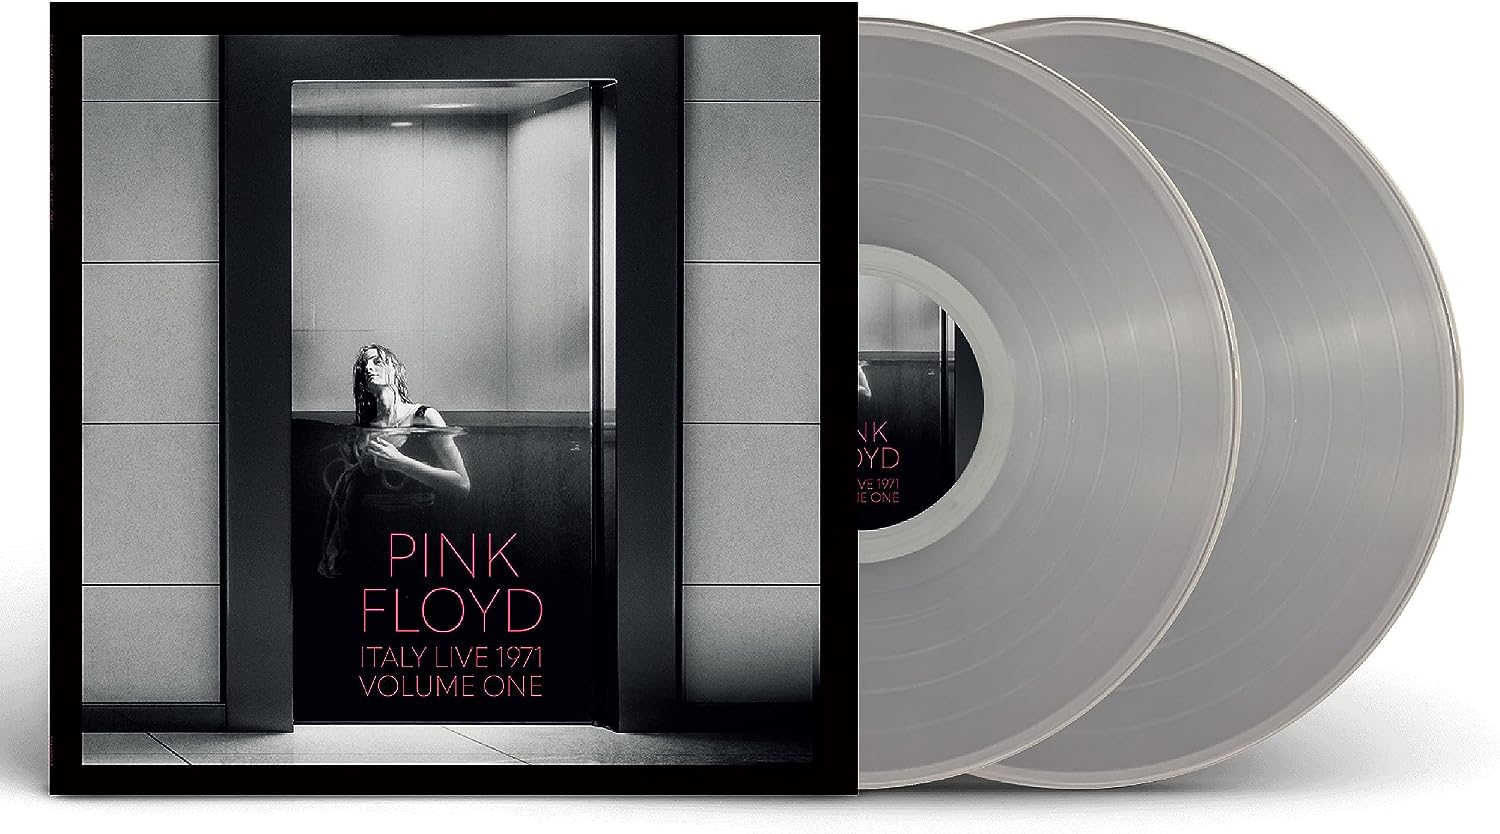 PINK FLOYD - Italy Live 1971 Vol.1 - Limited Clear Vinyl